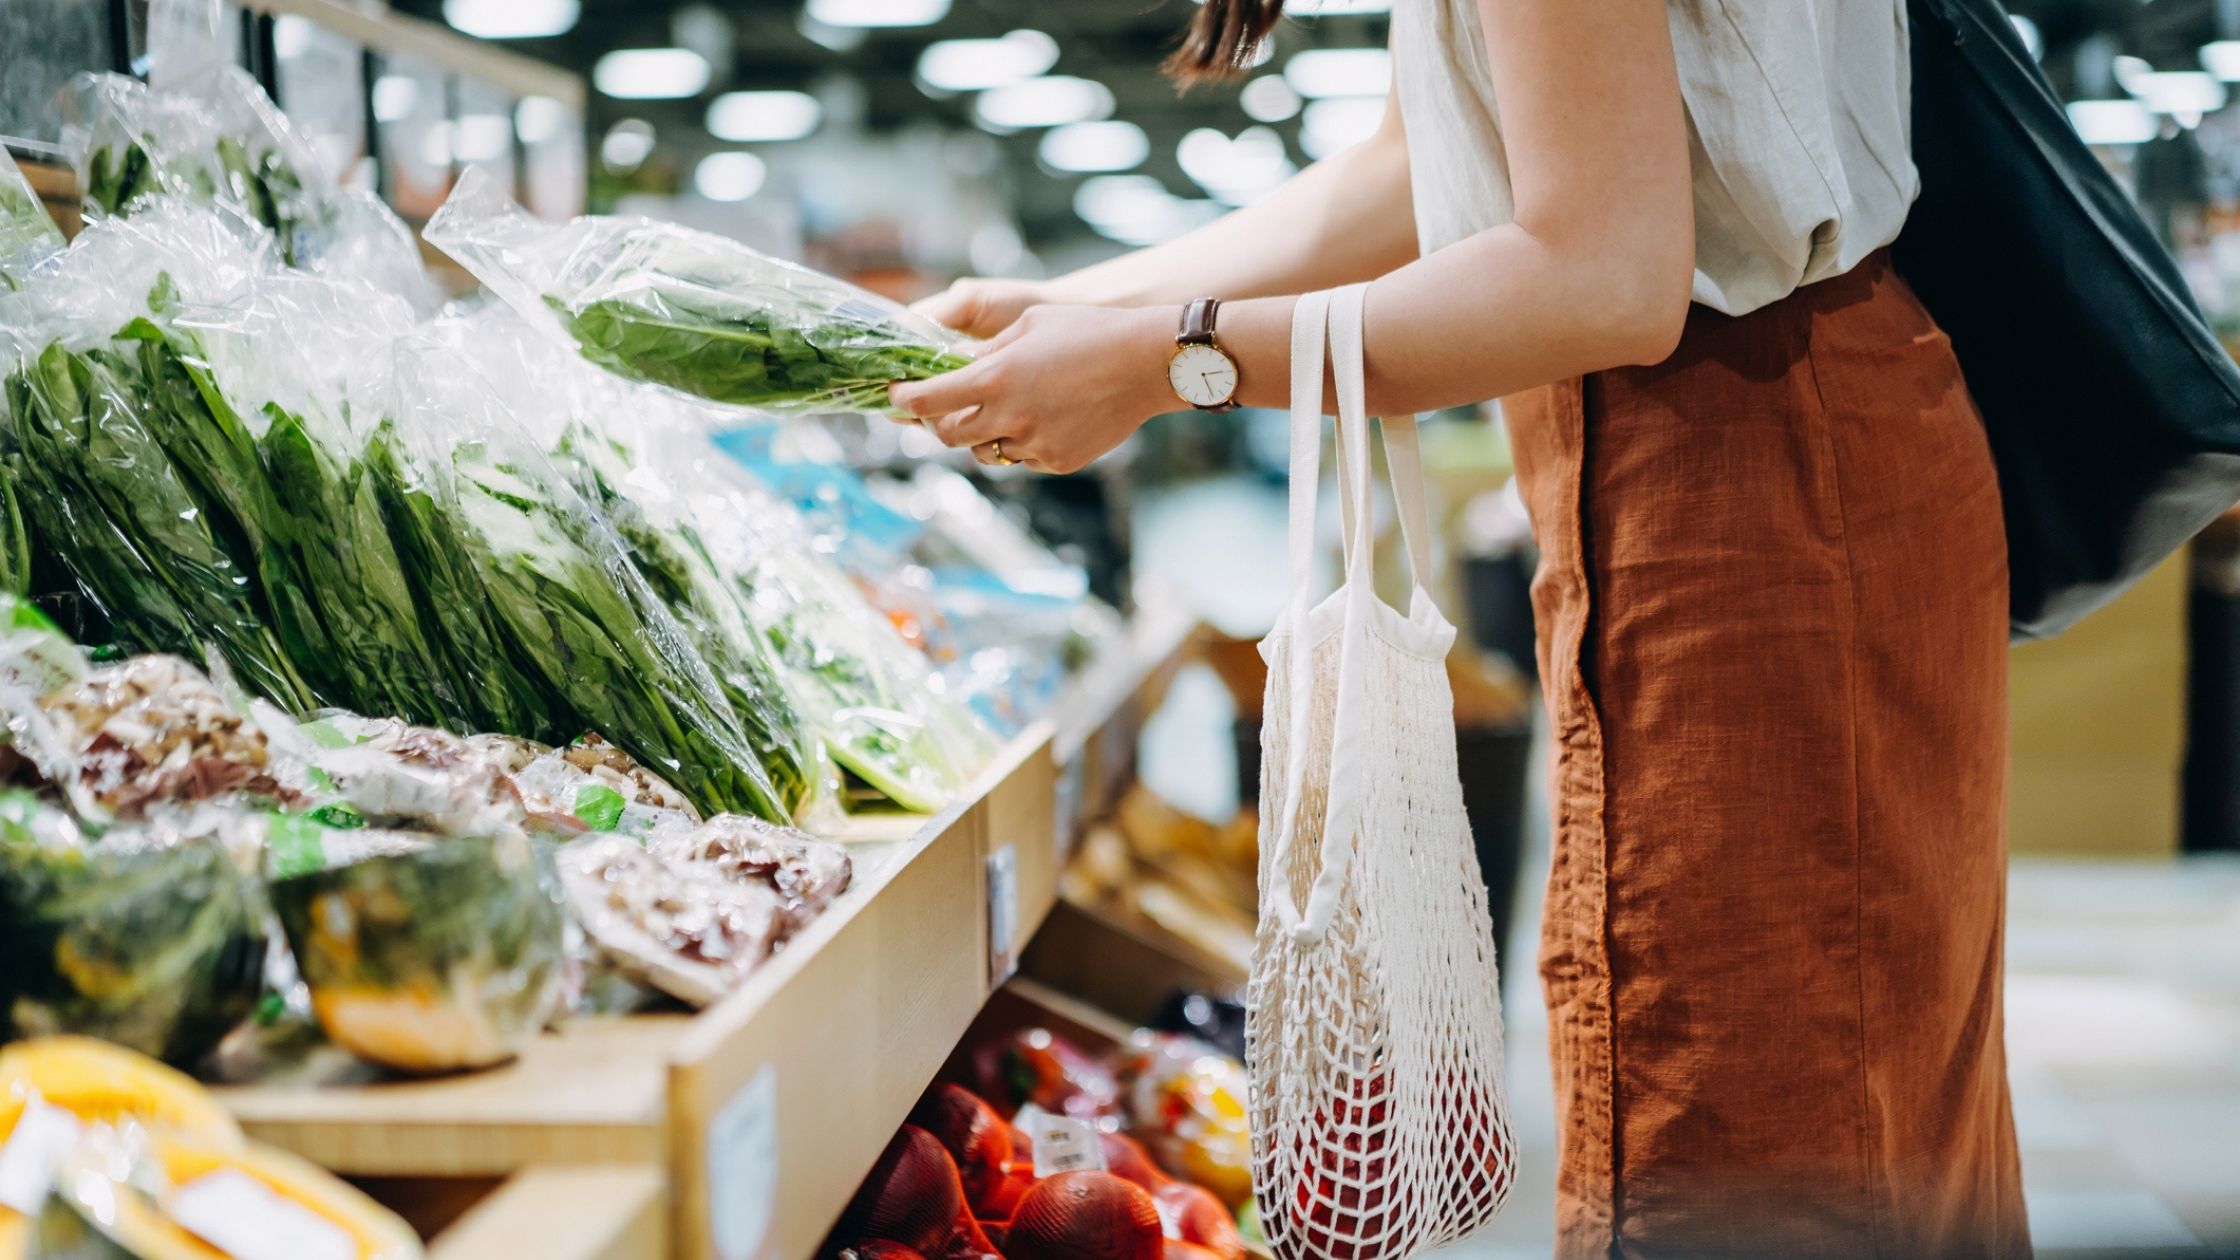 The above stock photo shows a woman shopping for produce at the store.